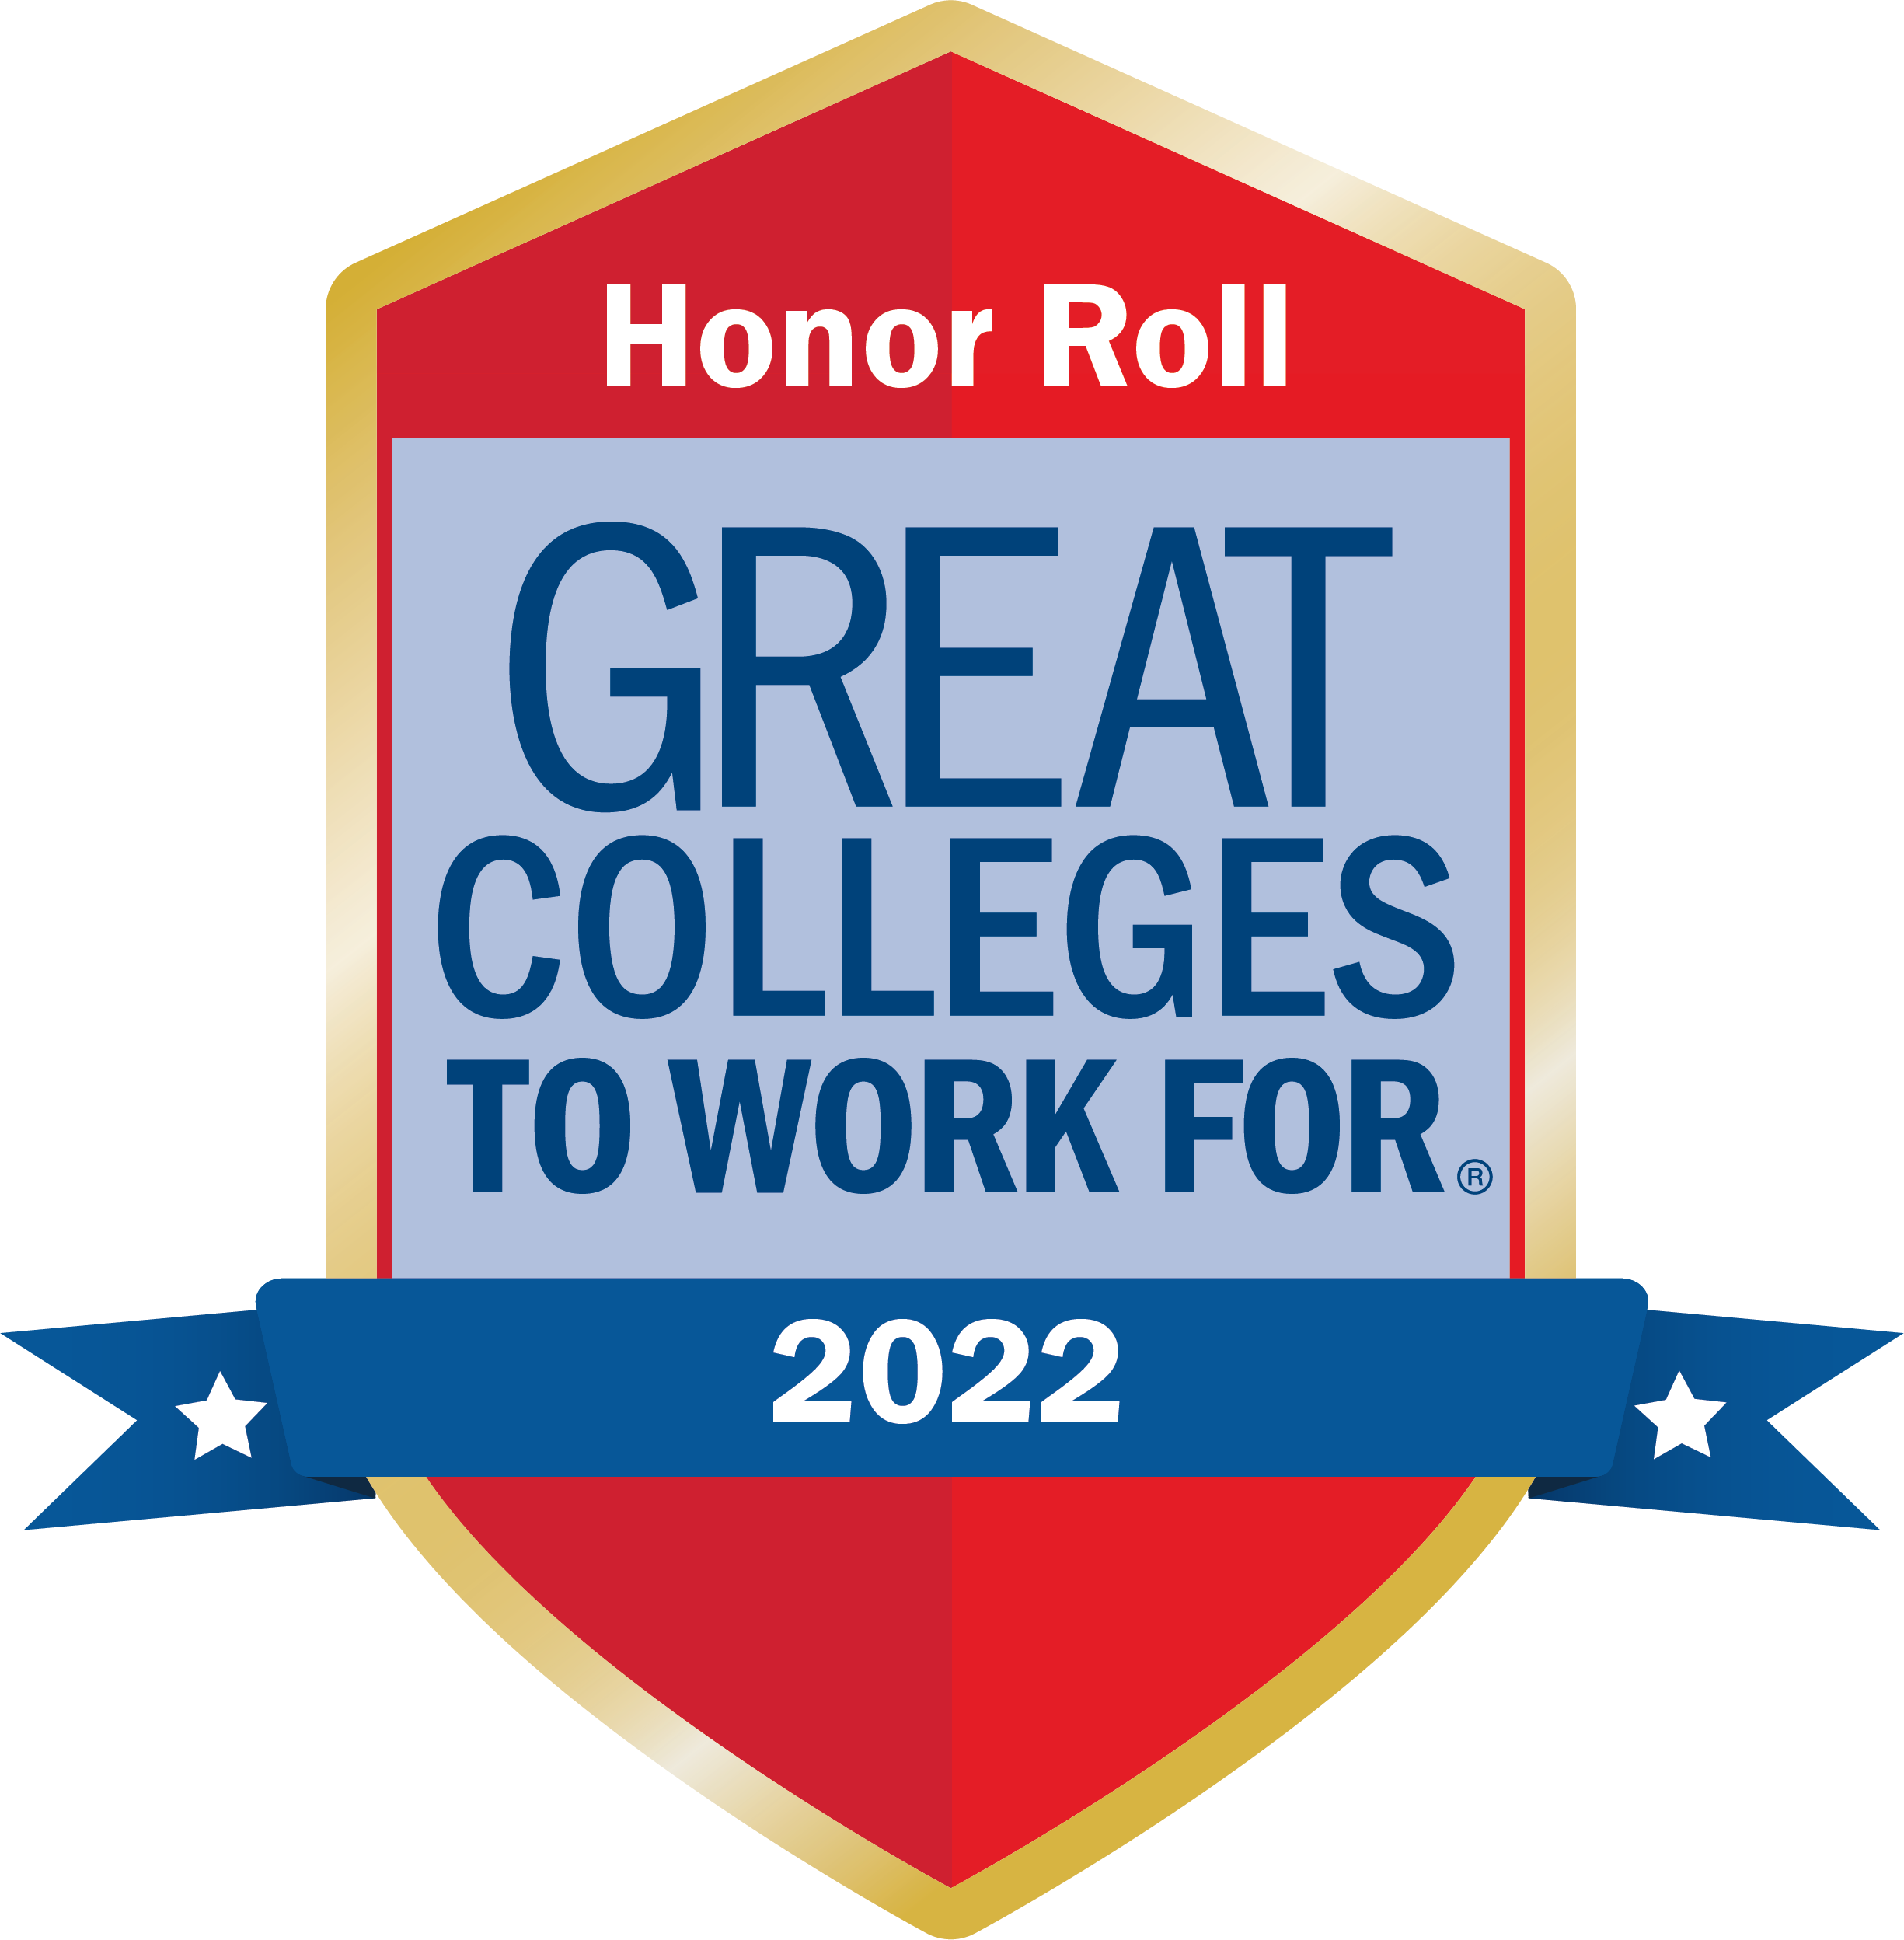 In 2022, TTUHSC was recognized as a great college to work for 